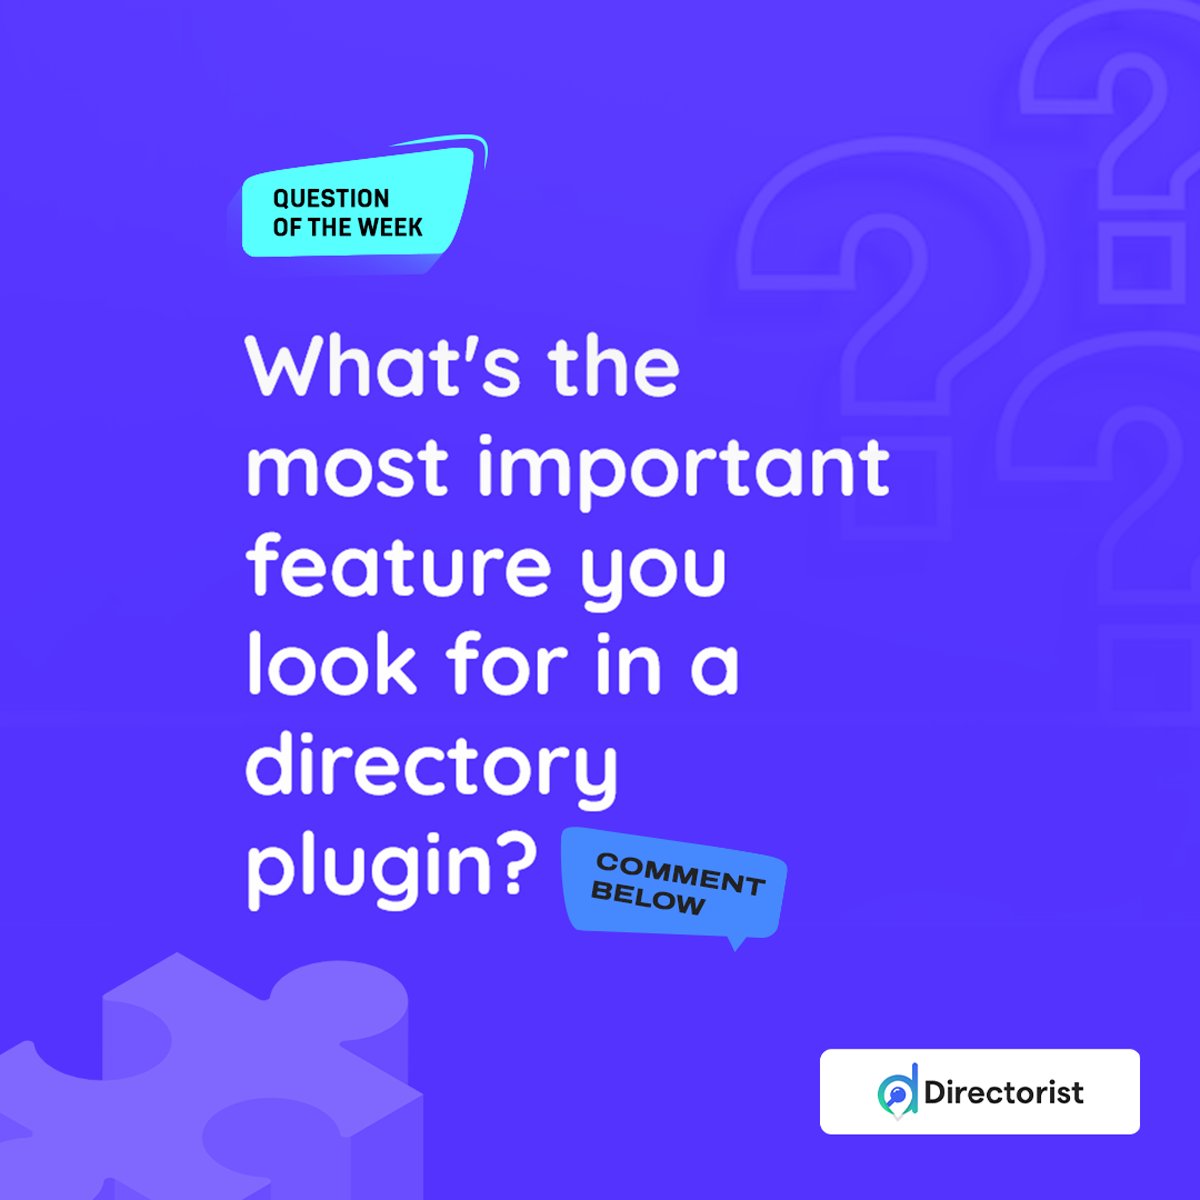 Curious minds want to know! Drop a comment with your top directory plugin feature.
#wordpress #wordpressplugins #directorywebsite #pluginfeatures #directoryplugin #wordpresswebsite